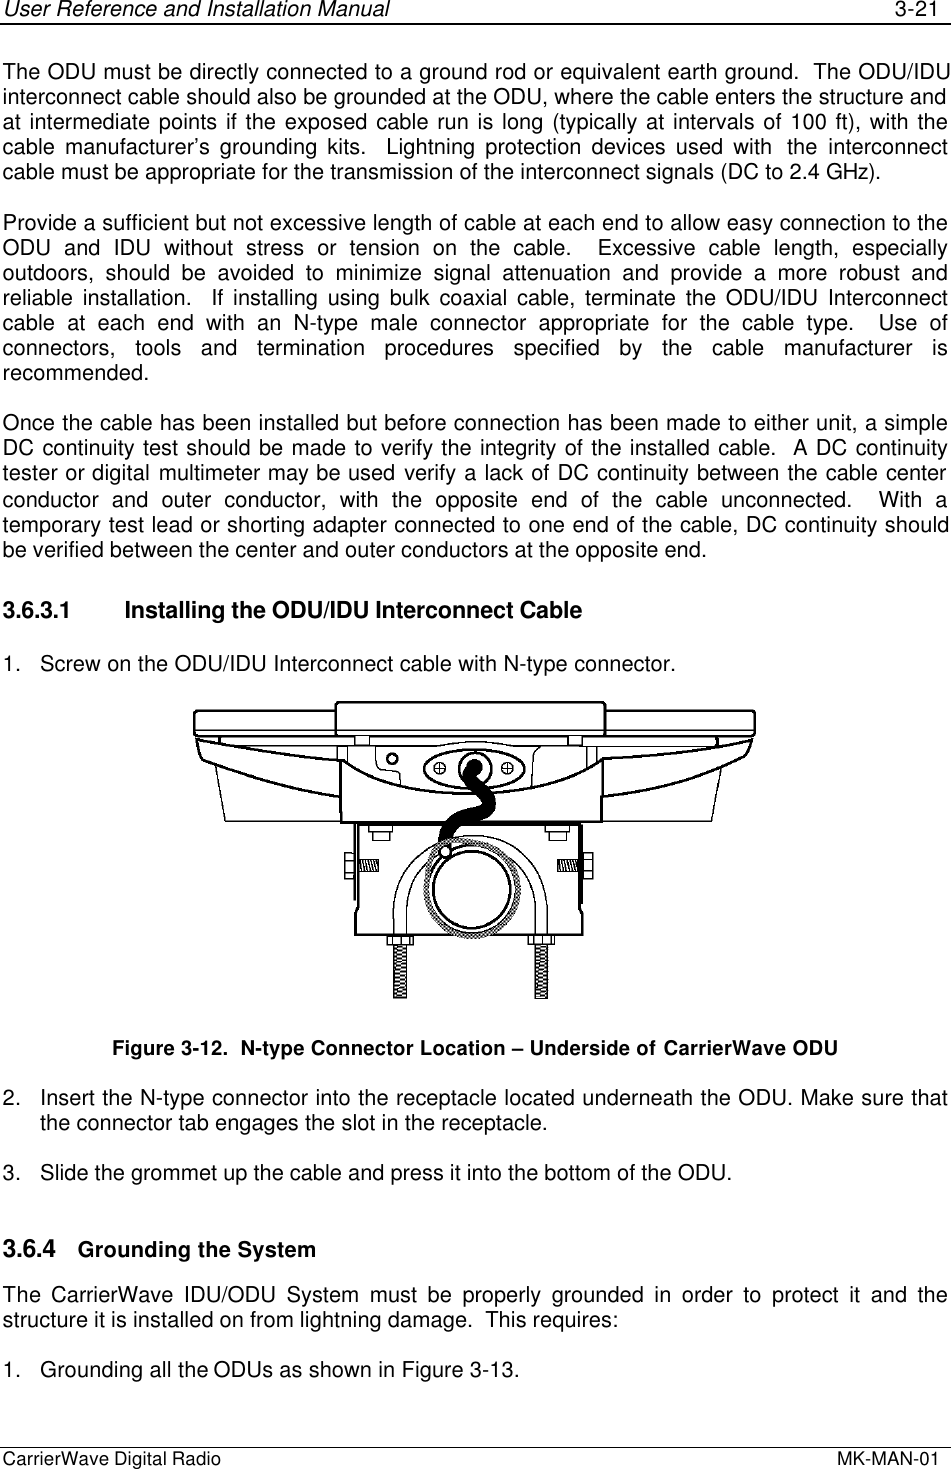 User Reference and Installation Manual 3-21CarrierWave Digital Radio  MK-MAN-01The ODU must be directly connected to a ground rod or equivalent earth ground.  The ODU/IDUinterconnect cable should also be grounded at the ODU, where the cable enters the structure andat intermediate points if the exposed cable run is long (typically at intervals of 100 ft), with thecable manufacturer’s grounding kits.  Lightning protection devices used with  the interconnectcable must be appropriate for the transmission of the interconnect signals (DC to 2.4 GHz).Provide a sufficient but not excessive length of cable at each end to allow easy connection to theODU and IDU without stress or tension on the cable.  Excessive cable length, especiallyoutdoors, should be avoided to minimize signal attenuation and provide a more robust andreliable installation.  If installing using bulk coaxial cable, terminate the ODU/IDU Interconnectcable at each end with an N-type male connector appropriate for the cable type.  Use ofconnectors, tools and termination procedures specified by the cable manufacturer isrecommended.Once the cable has been installed but before connection has been made to either unit, a simpleDC continuity test should be made to verify the integrity of the installed cable.  A DC continuitytester or digital multimeter may be used verify a lack of DC continuity between the cable centerconductor and outer conductor, with the opposite end of the cable unconnected.  With atemporary test lead or shorting adapter connected to one end of the cable, DC continuity shouldbe verified between the center and outer conductors at the opposite end.3.6.3.1 Installing the ODU/IDU Interconnect Cable1. Screw on the ODU/IDU Interconnect cable with N-type connector.Figure 3-12.  N-type Connector Location – Underside of CarrierWave ODU2. Insert the N-type connector into the receptacle located underneath the ODU. Make sure thatthe connector tab engages the slot in the receptacle.3. Slide the grommet up the cable and press it into the bottom of the ODU.3.6.4 Grounding the SystemThe CarrierWave IDU/ODU System must be properly grounded in order to protect it and thestructure it is installed on from lightning damage.  This requires:1. Grounding all the ODUs as shown in Figure 3-13.